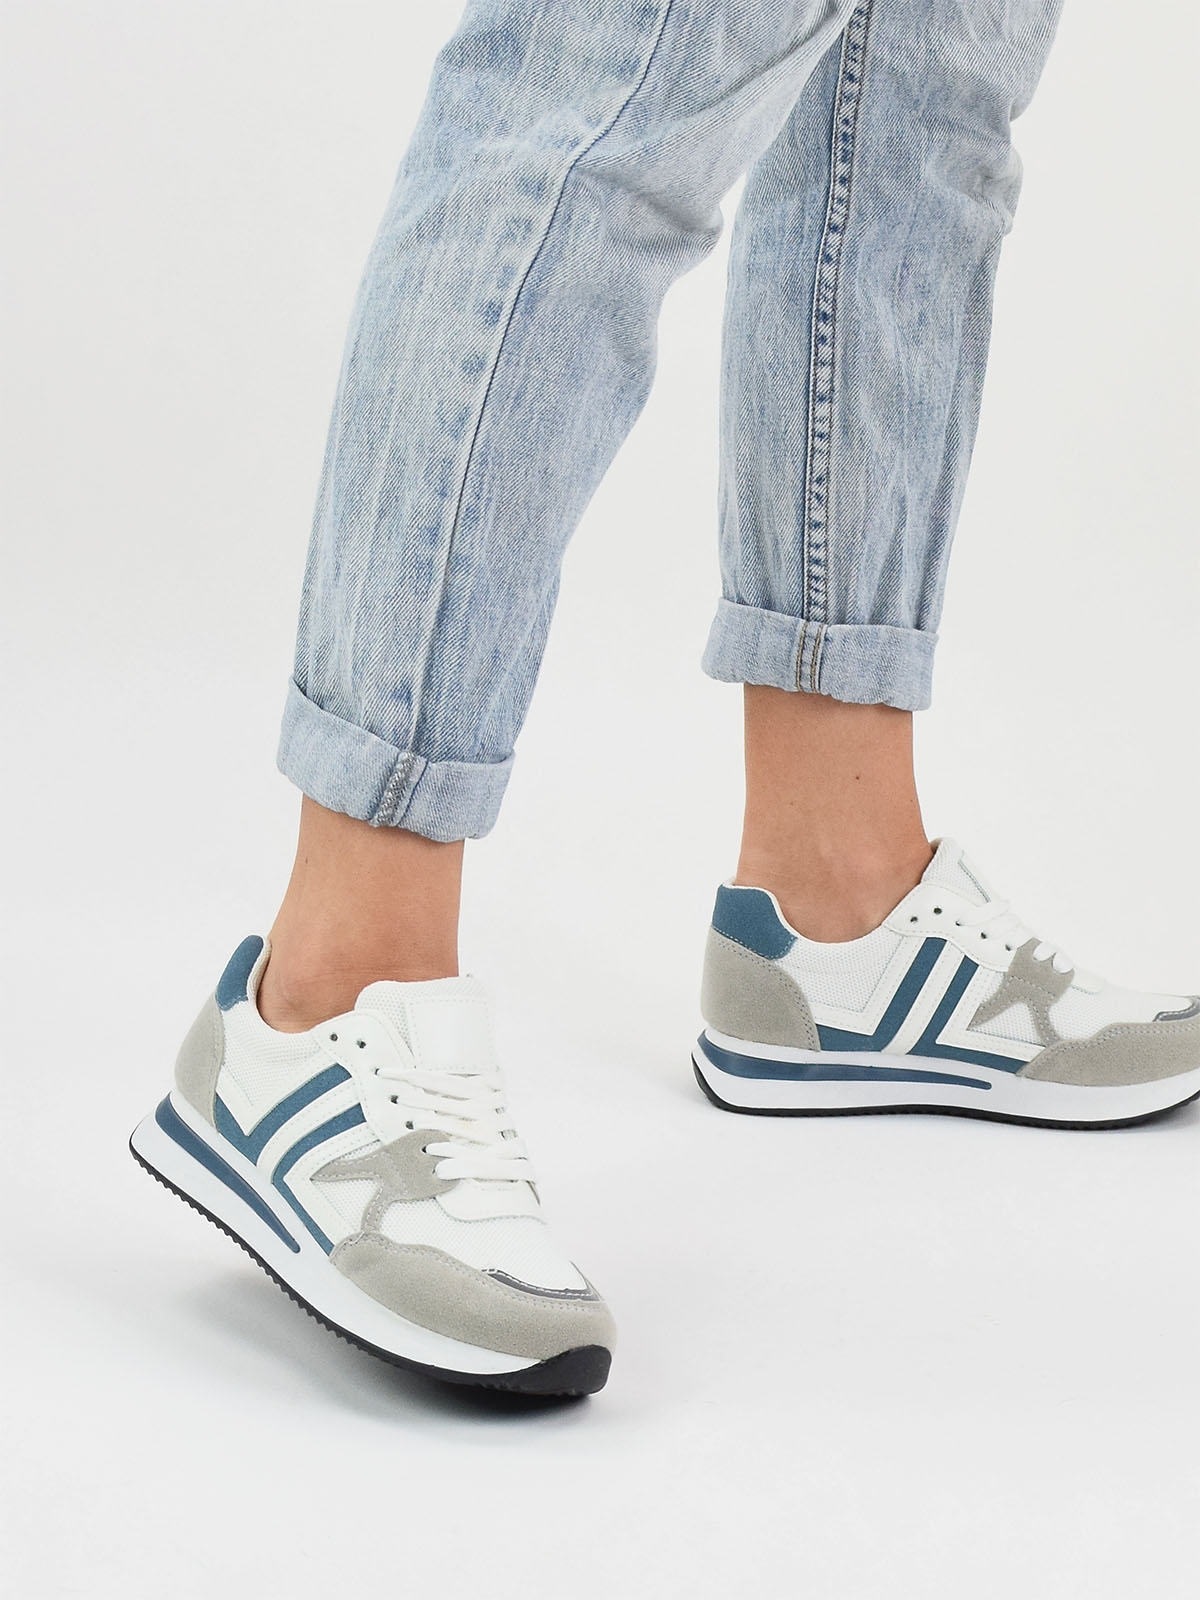 Lace up trainers with blue details in grey